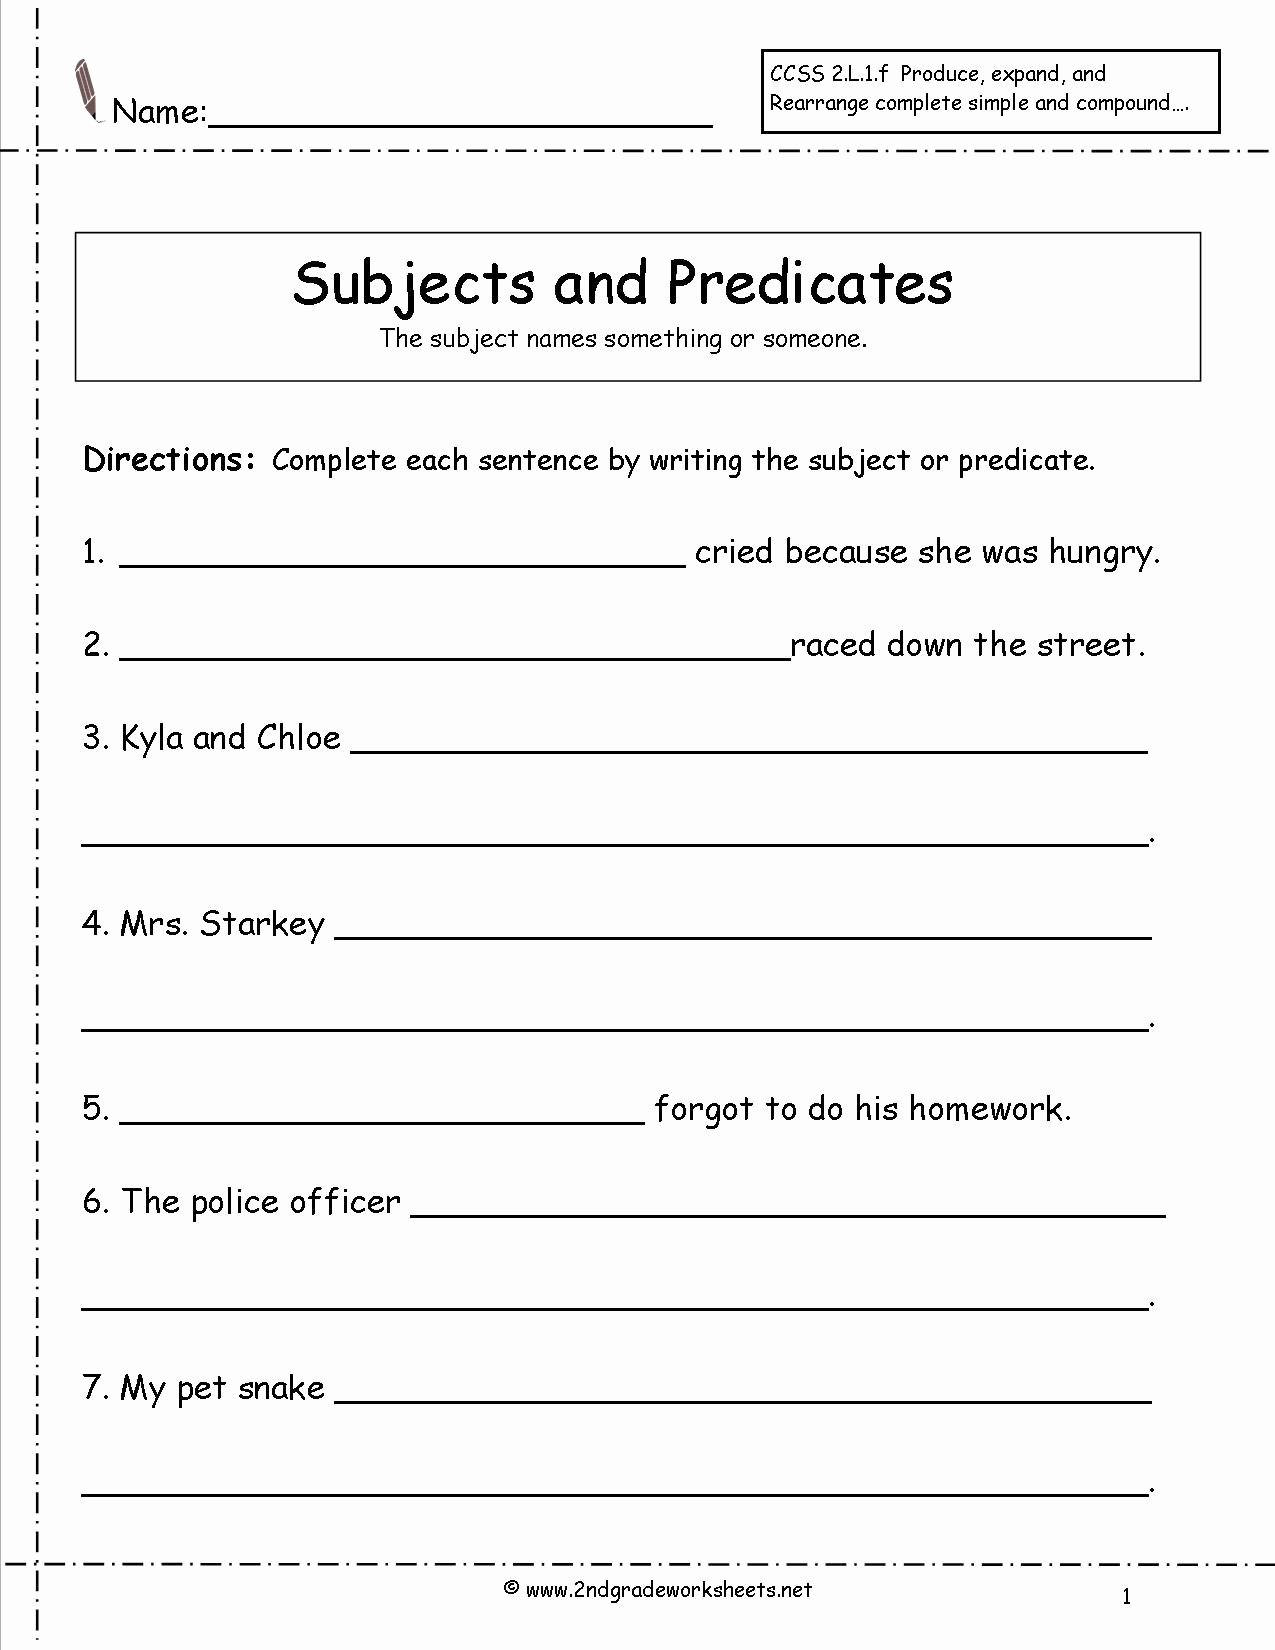 Subject and Predicate Worksheet Awesome Second Grade Subject and Predicate Game Google Search